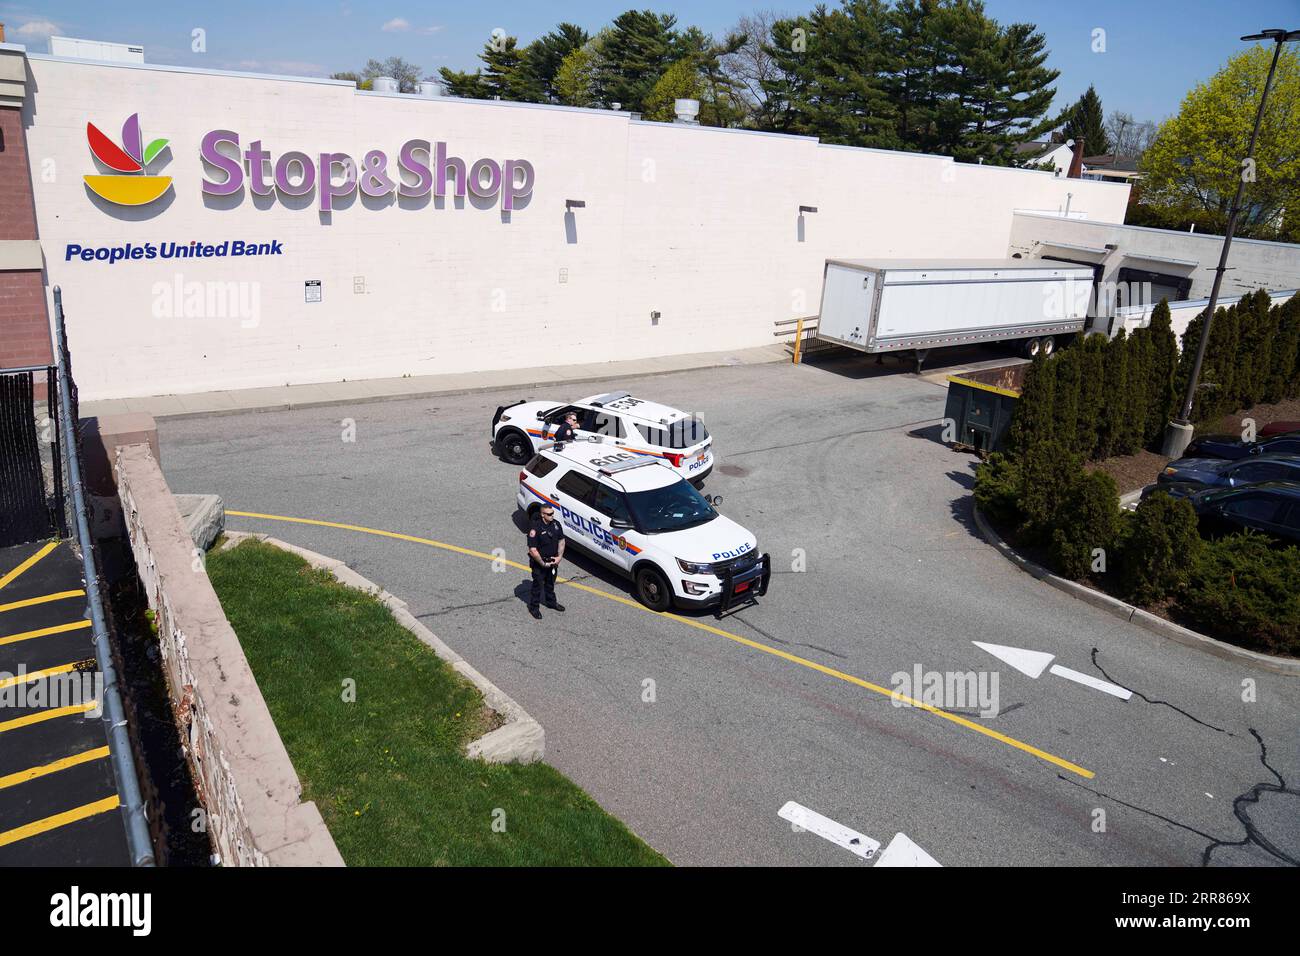 210420 -- NEW YORK, April 20, 2021 -- Policemen stand guard outside a Stop & Shop grocery store where a shooting took place in West Hempstead, New York, the United States, on April 20, 2021. A suspect in a shooting at the suburban New York grocery store on Tuesday was arrested after remaining at large for hours, local police said. The shooting, leaving one dead and two others injured, occurred late morning Tuesday at an office of the Stop & Shop grocery store in West Hempstead, according to police.  U.S.-NEW YORK-WEST HEMPSTEAD-SHOOTING WangxYing PUBLICATIONxNOTxINxCHN Stock Photo